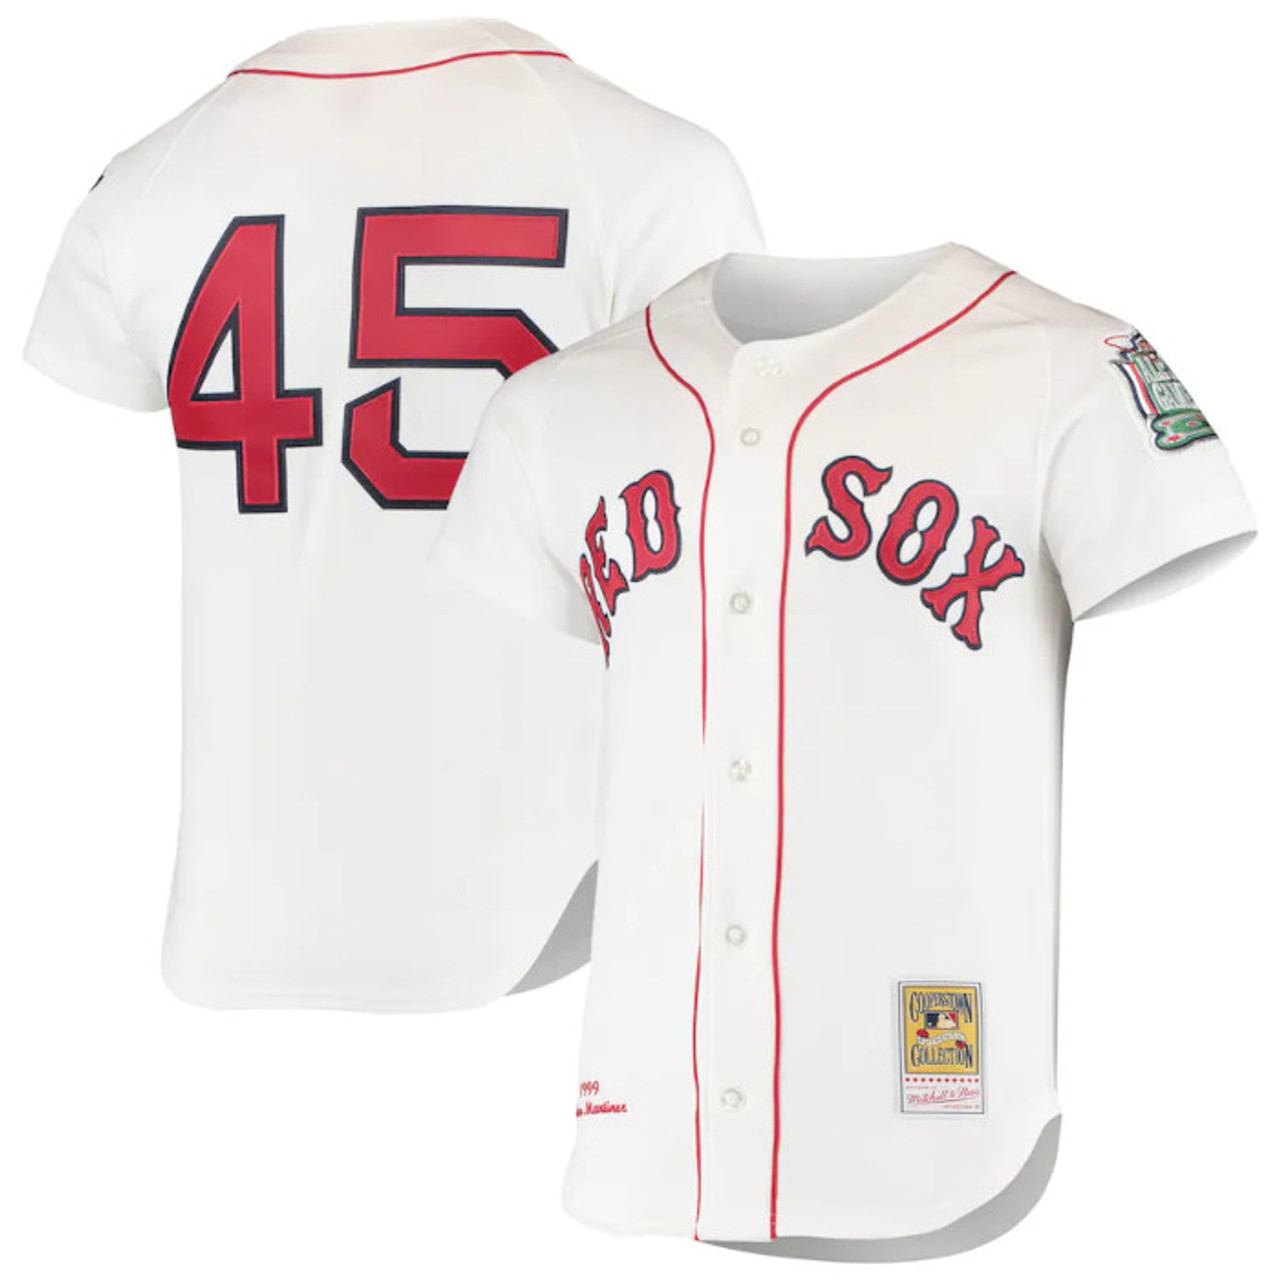 Red Sox reach 170 million jerseypatch deal Mets also interested